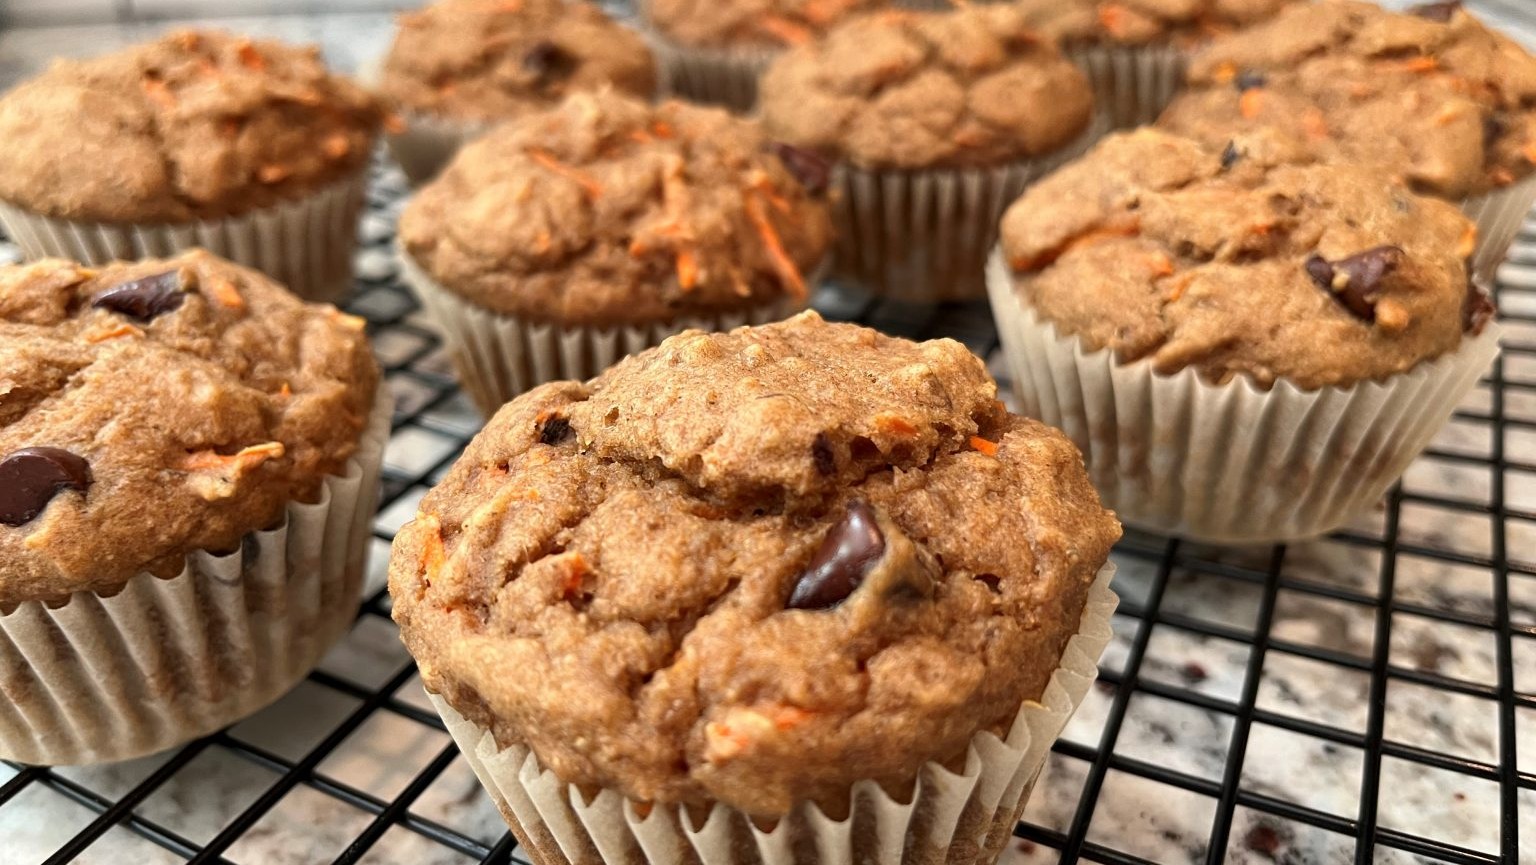 Image of Carrot Lentil Muffins with Dark Chocolate Chips